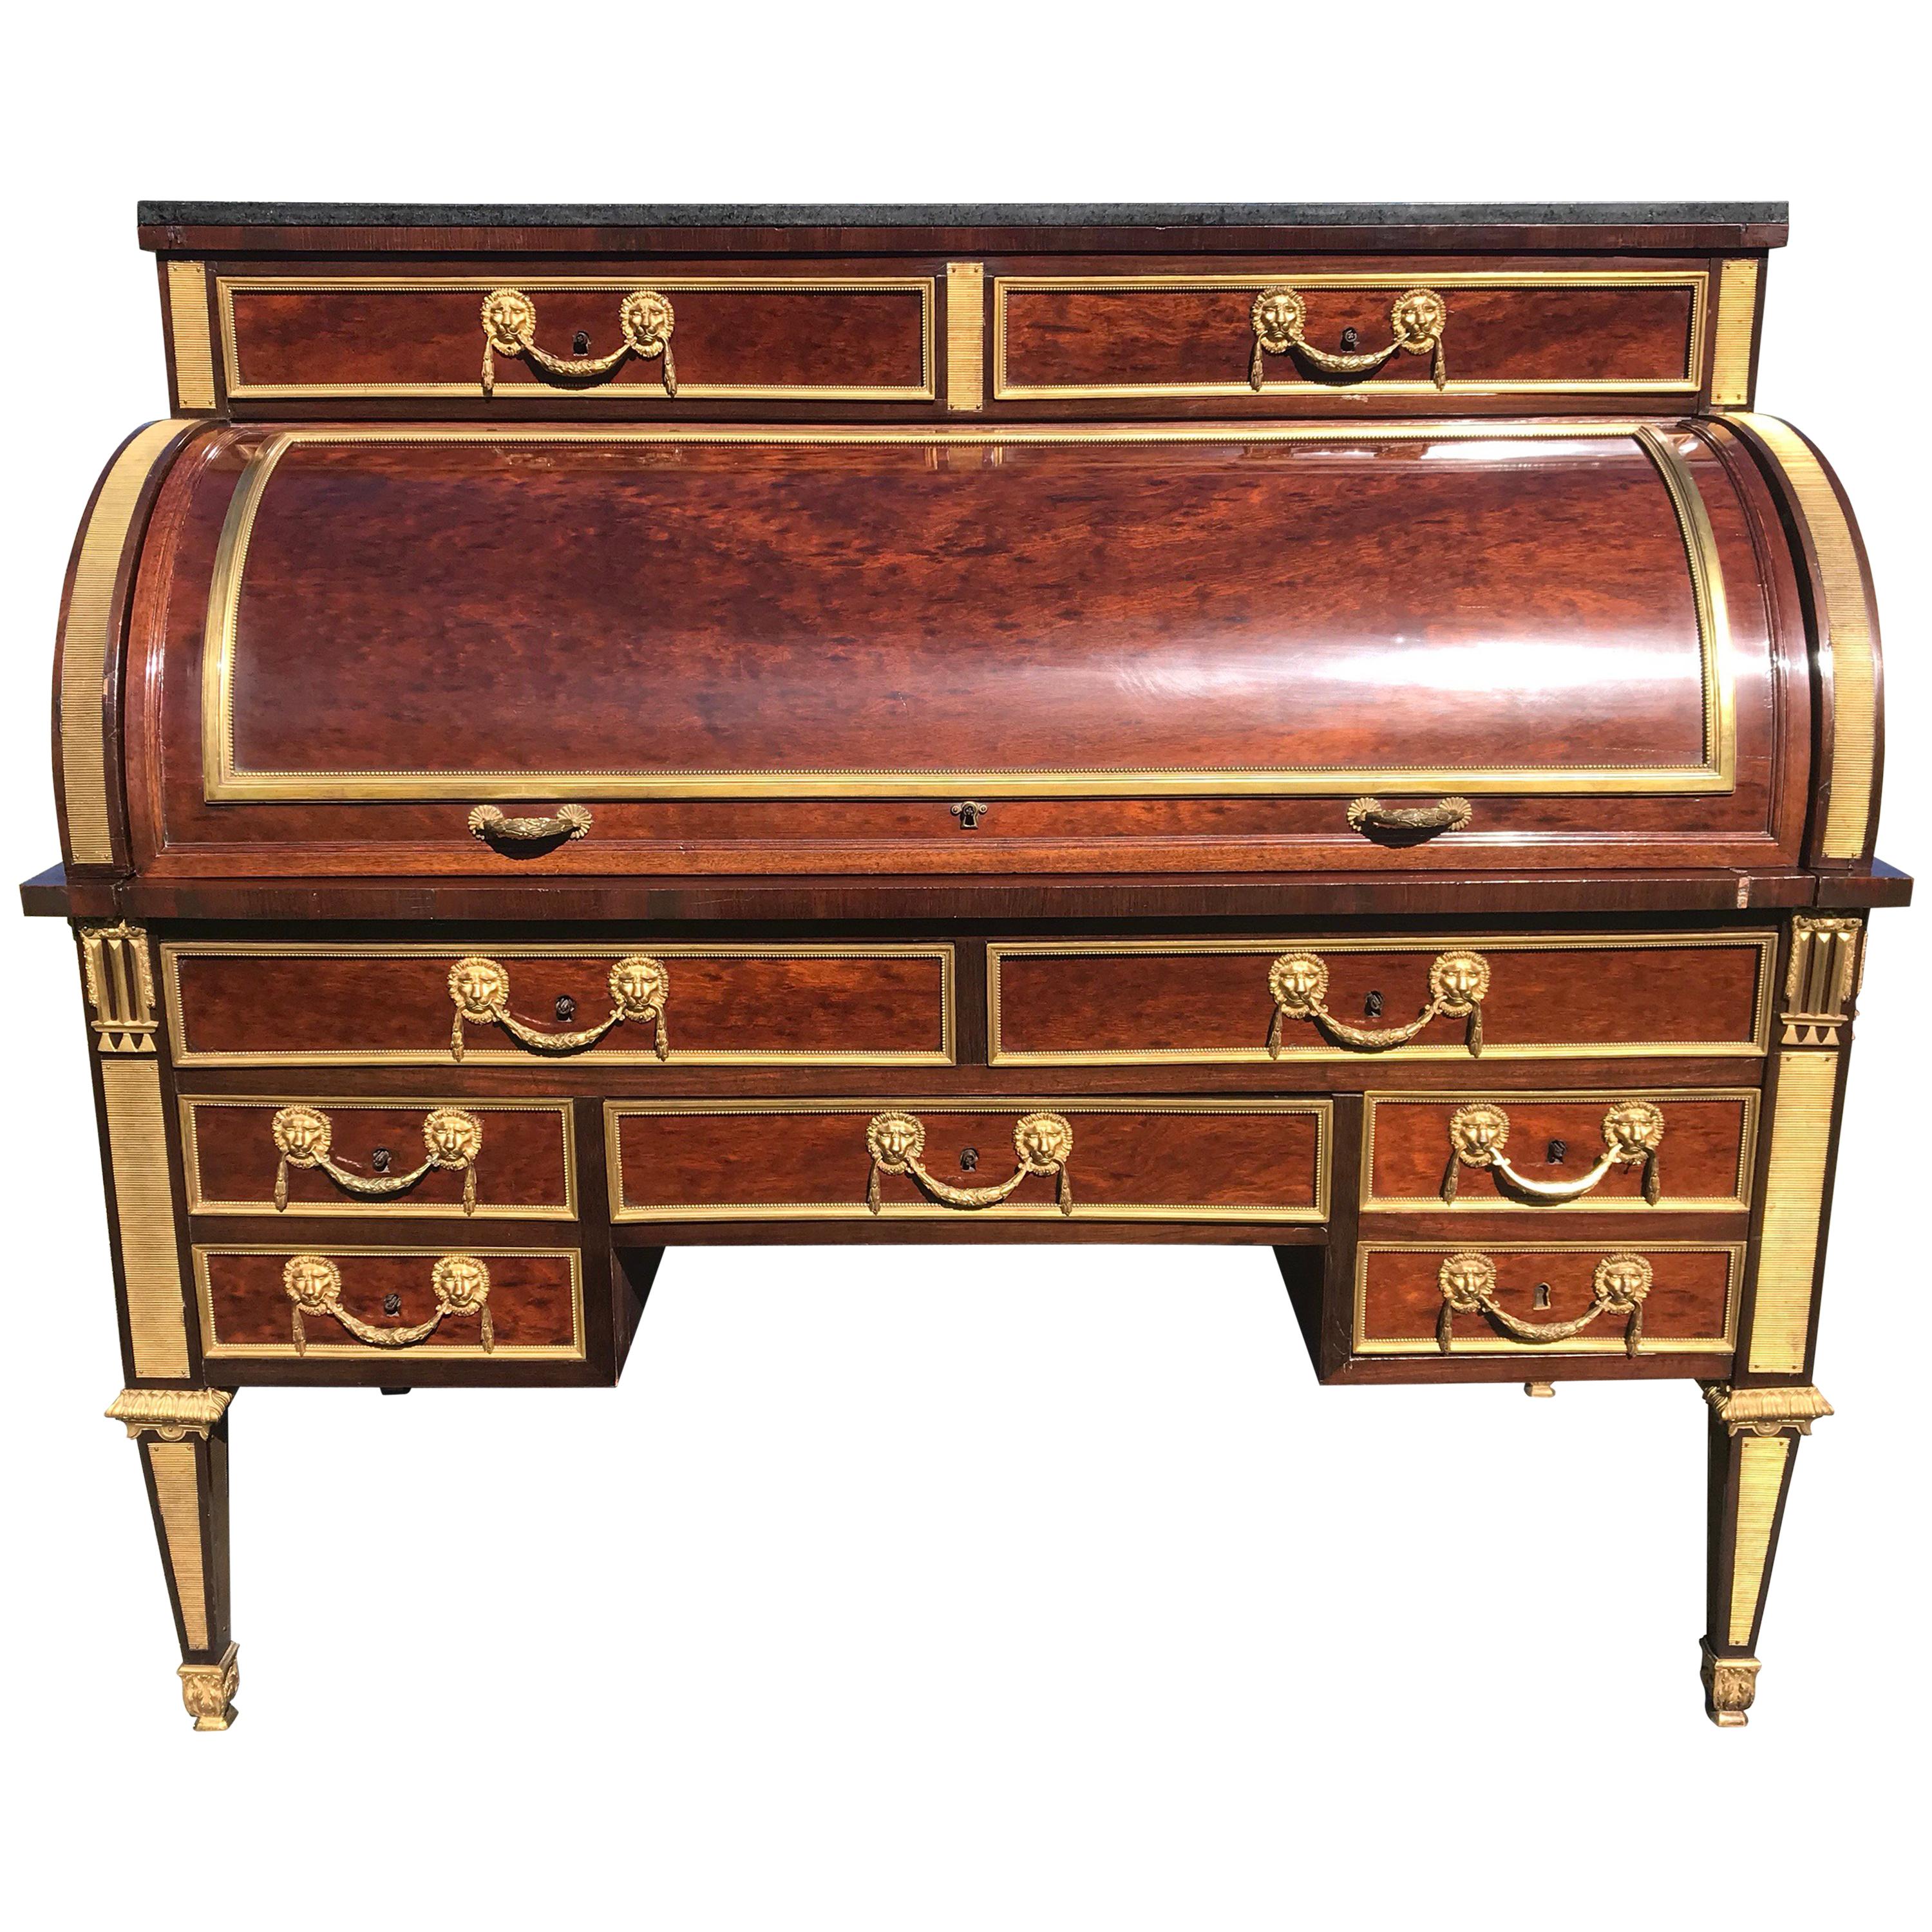 A Russian Neoclassical Roll Top Writing Desk